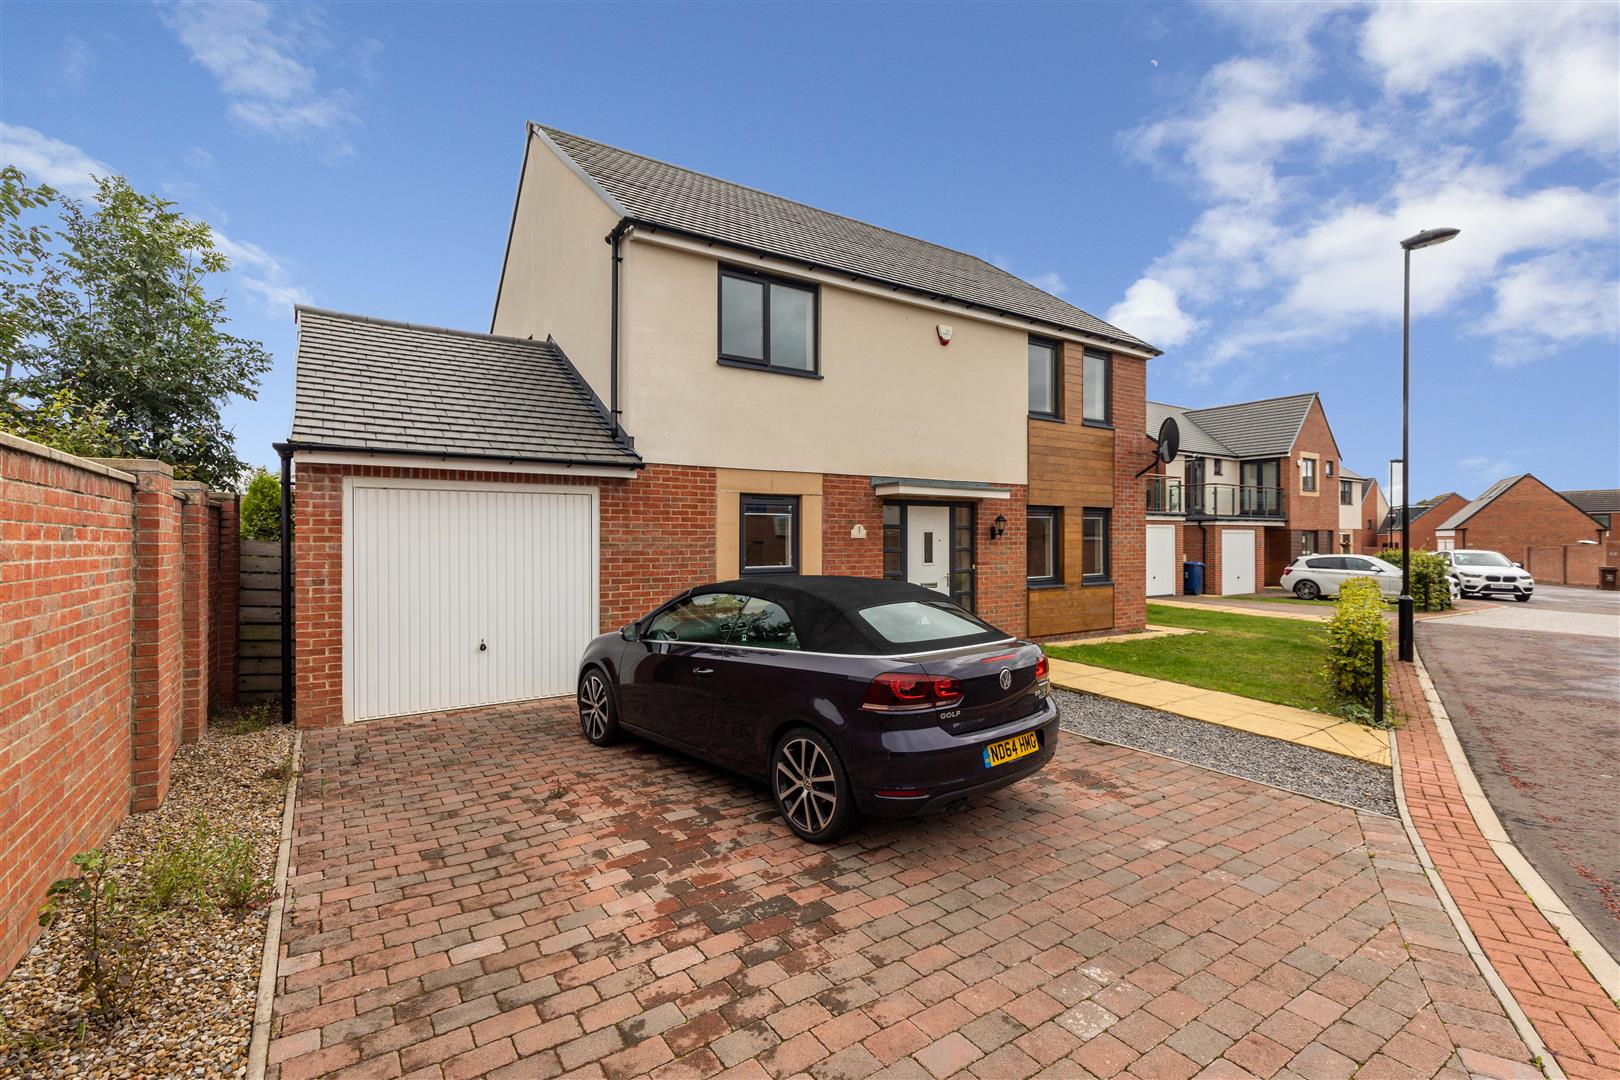 4 bed detached house for sale in Hethpool Court, Great Park - Property Image 1